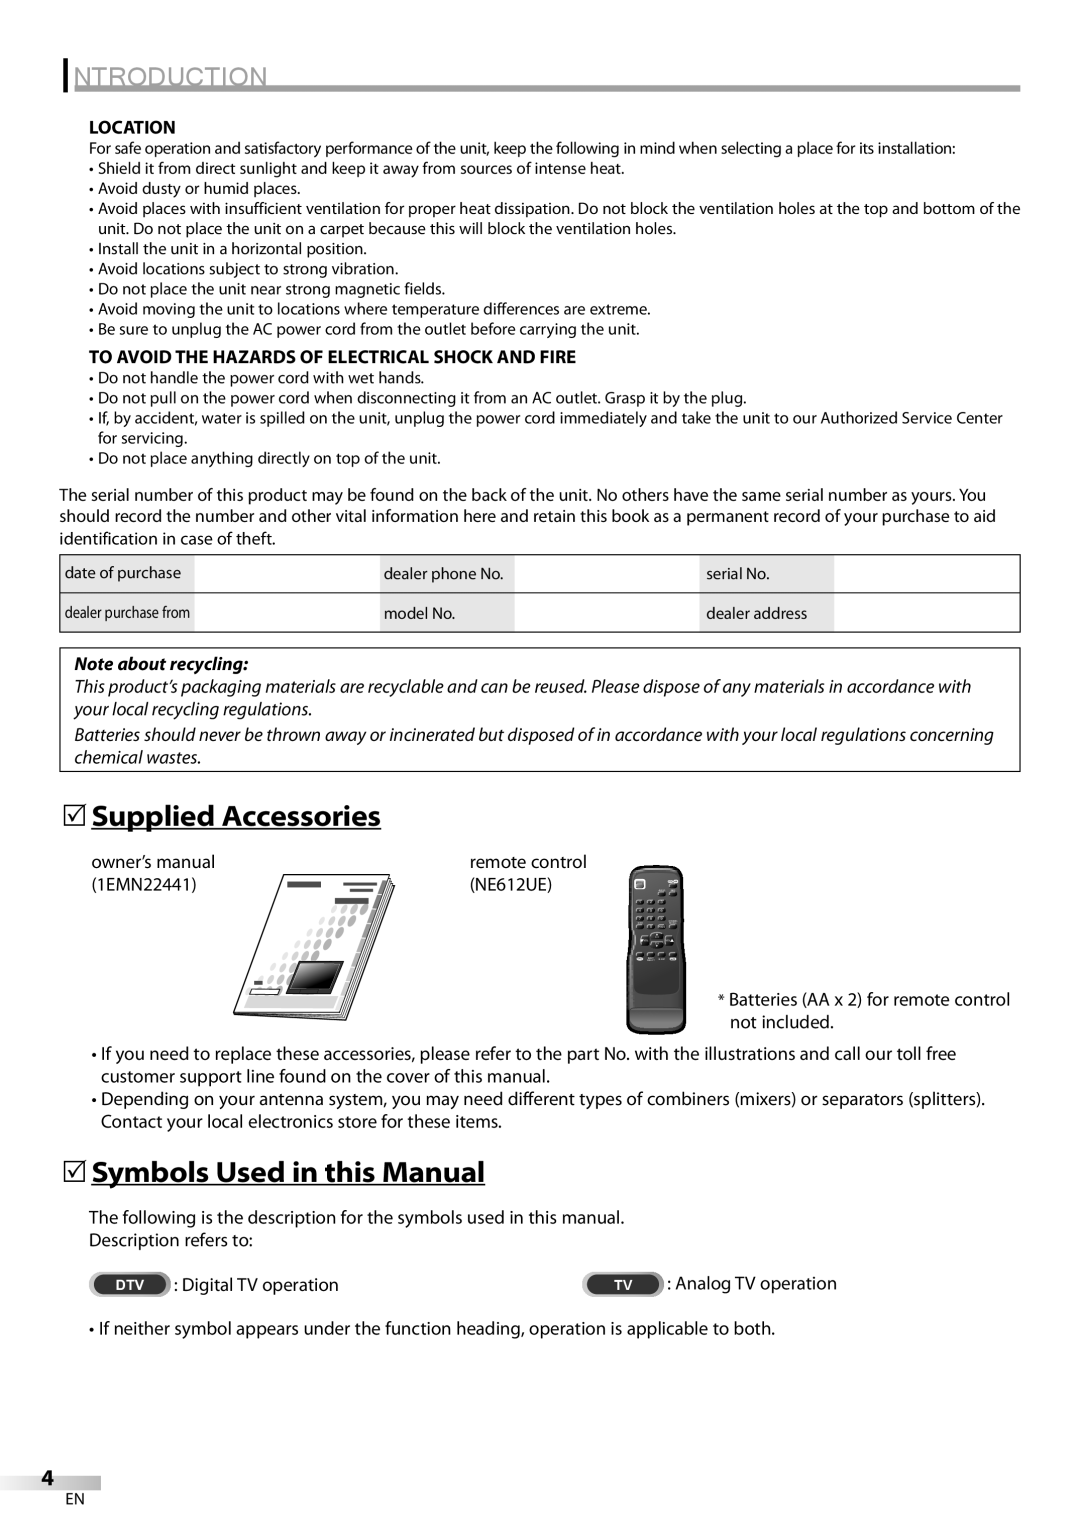 FUNAI CR130DR8 5Supplied Accessories, 5Symbols Used in this Manual, Introduction, Location, Note about recycling 